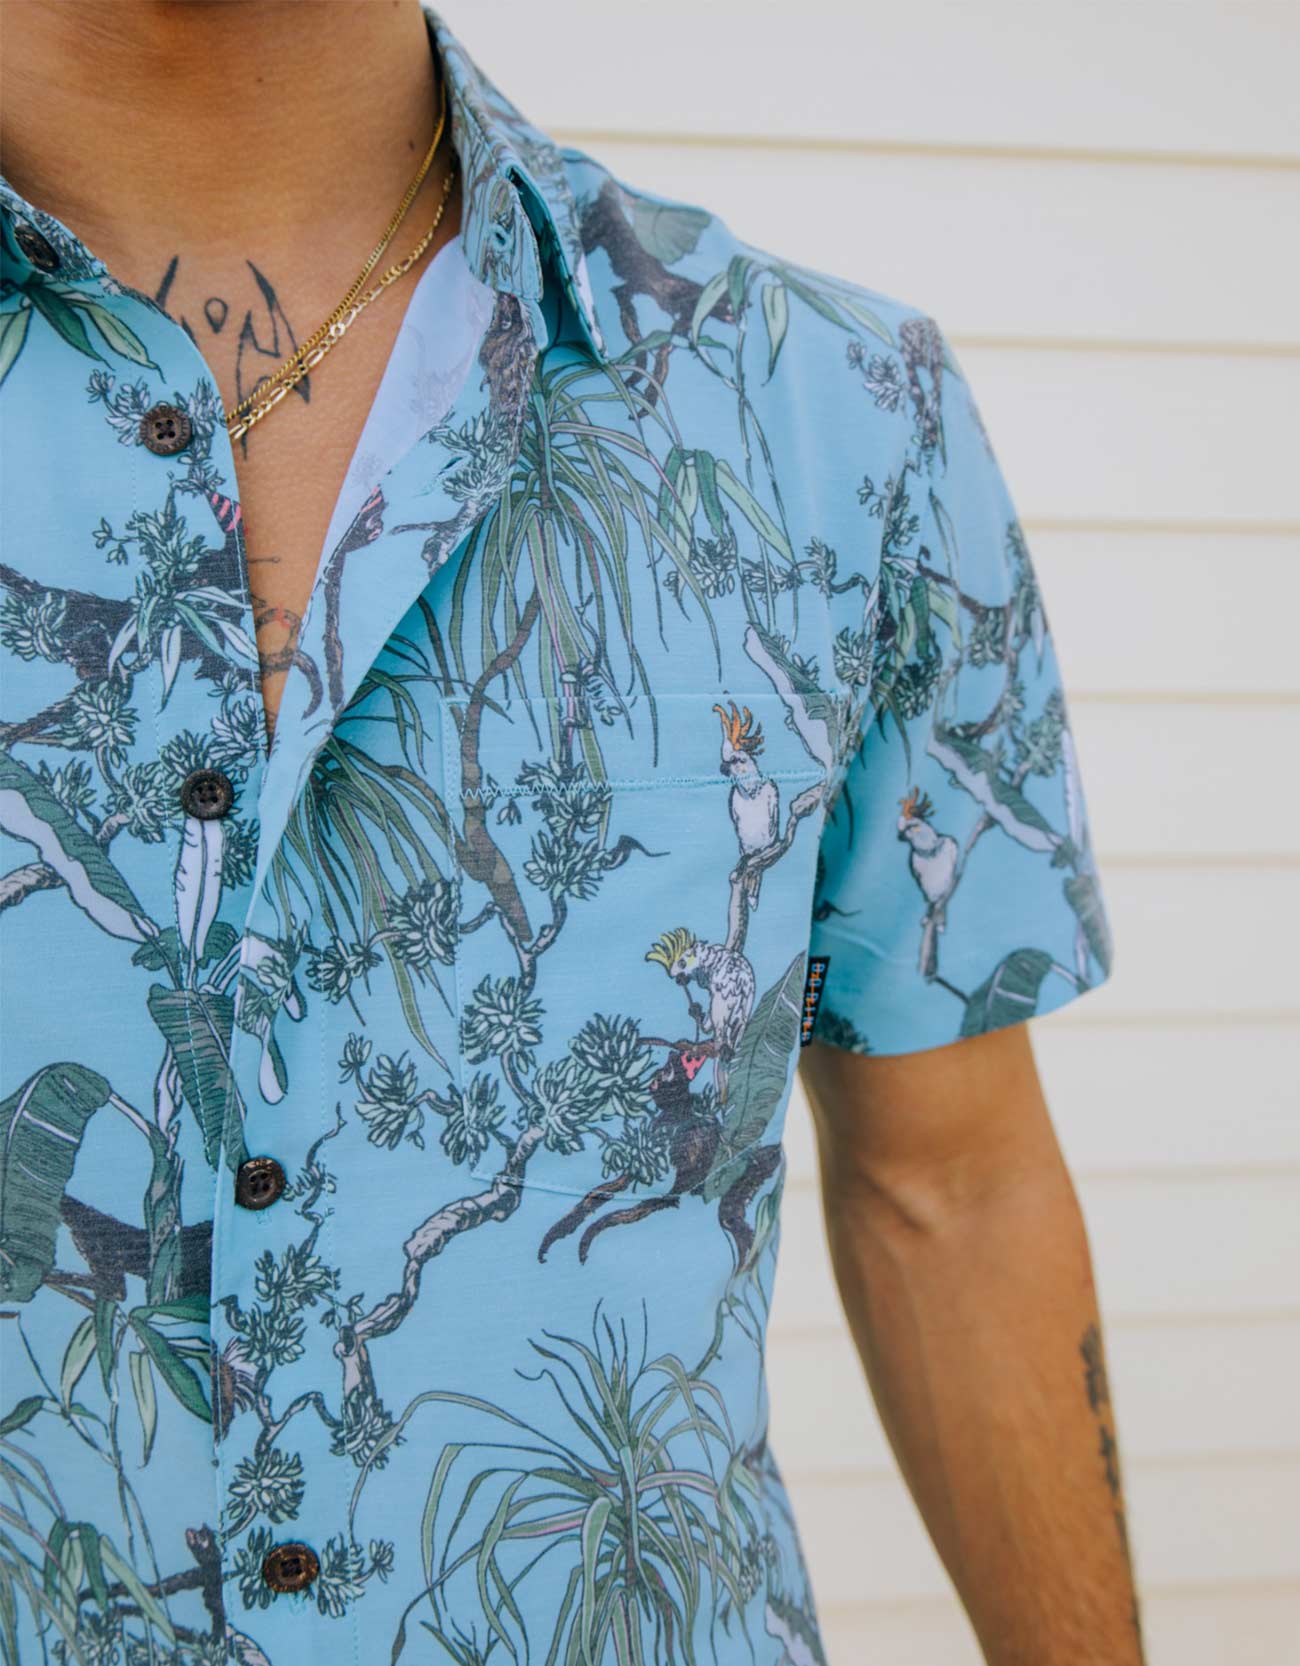 Baja Llama green monkey and bird party print Recycled Poly stretch short sleeve button up shirt